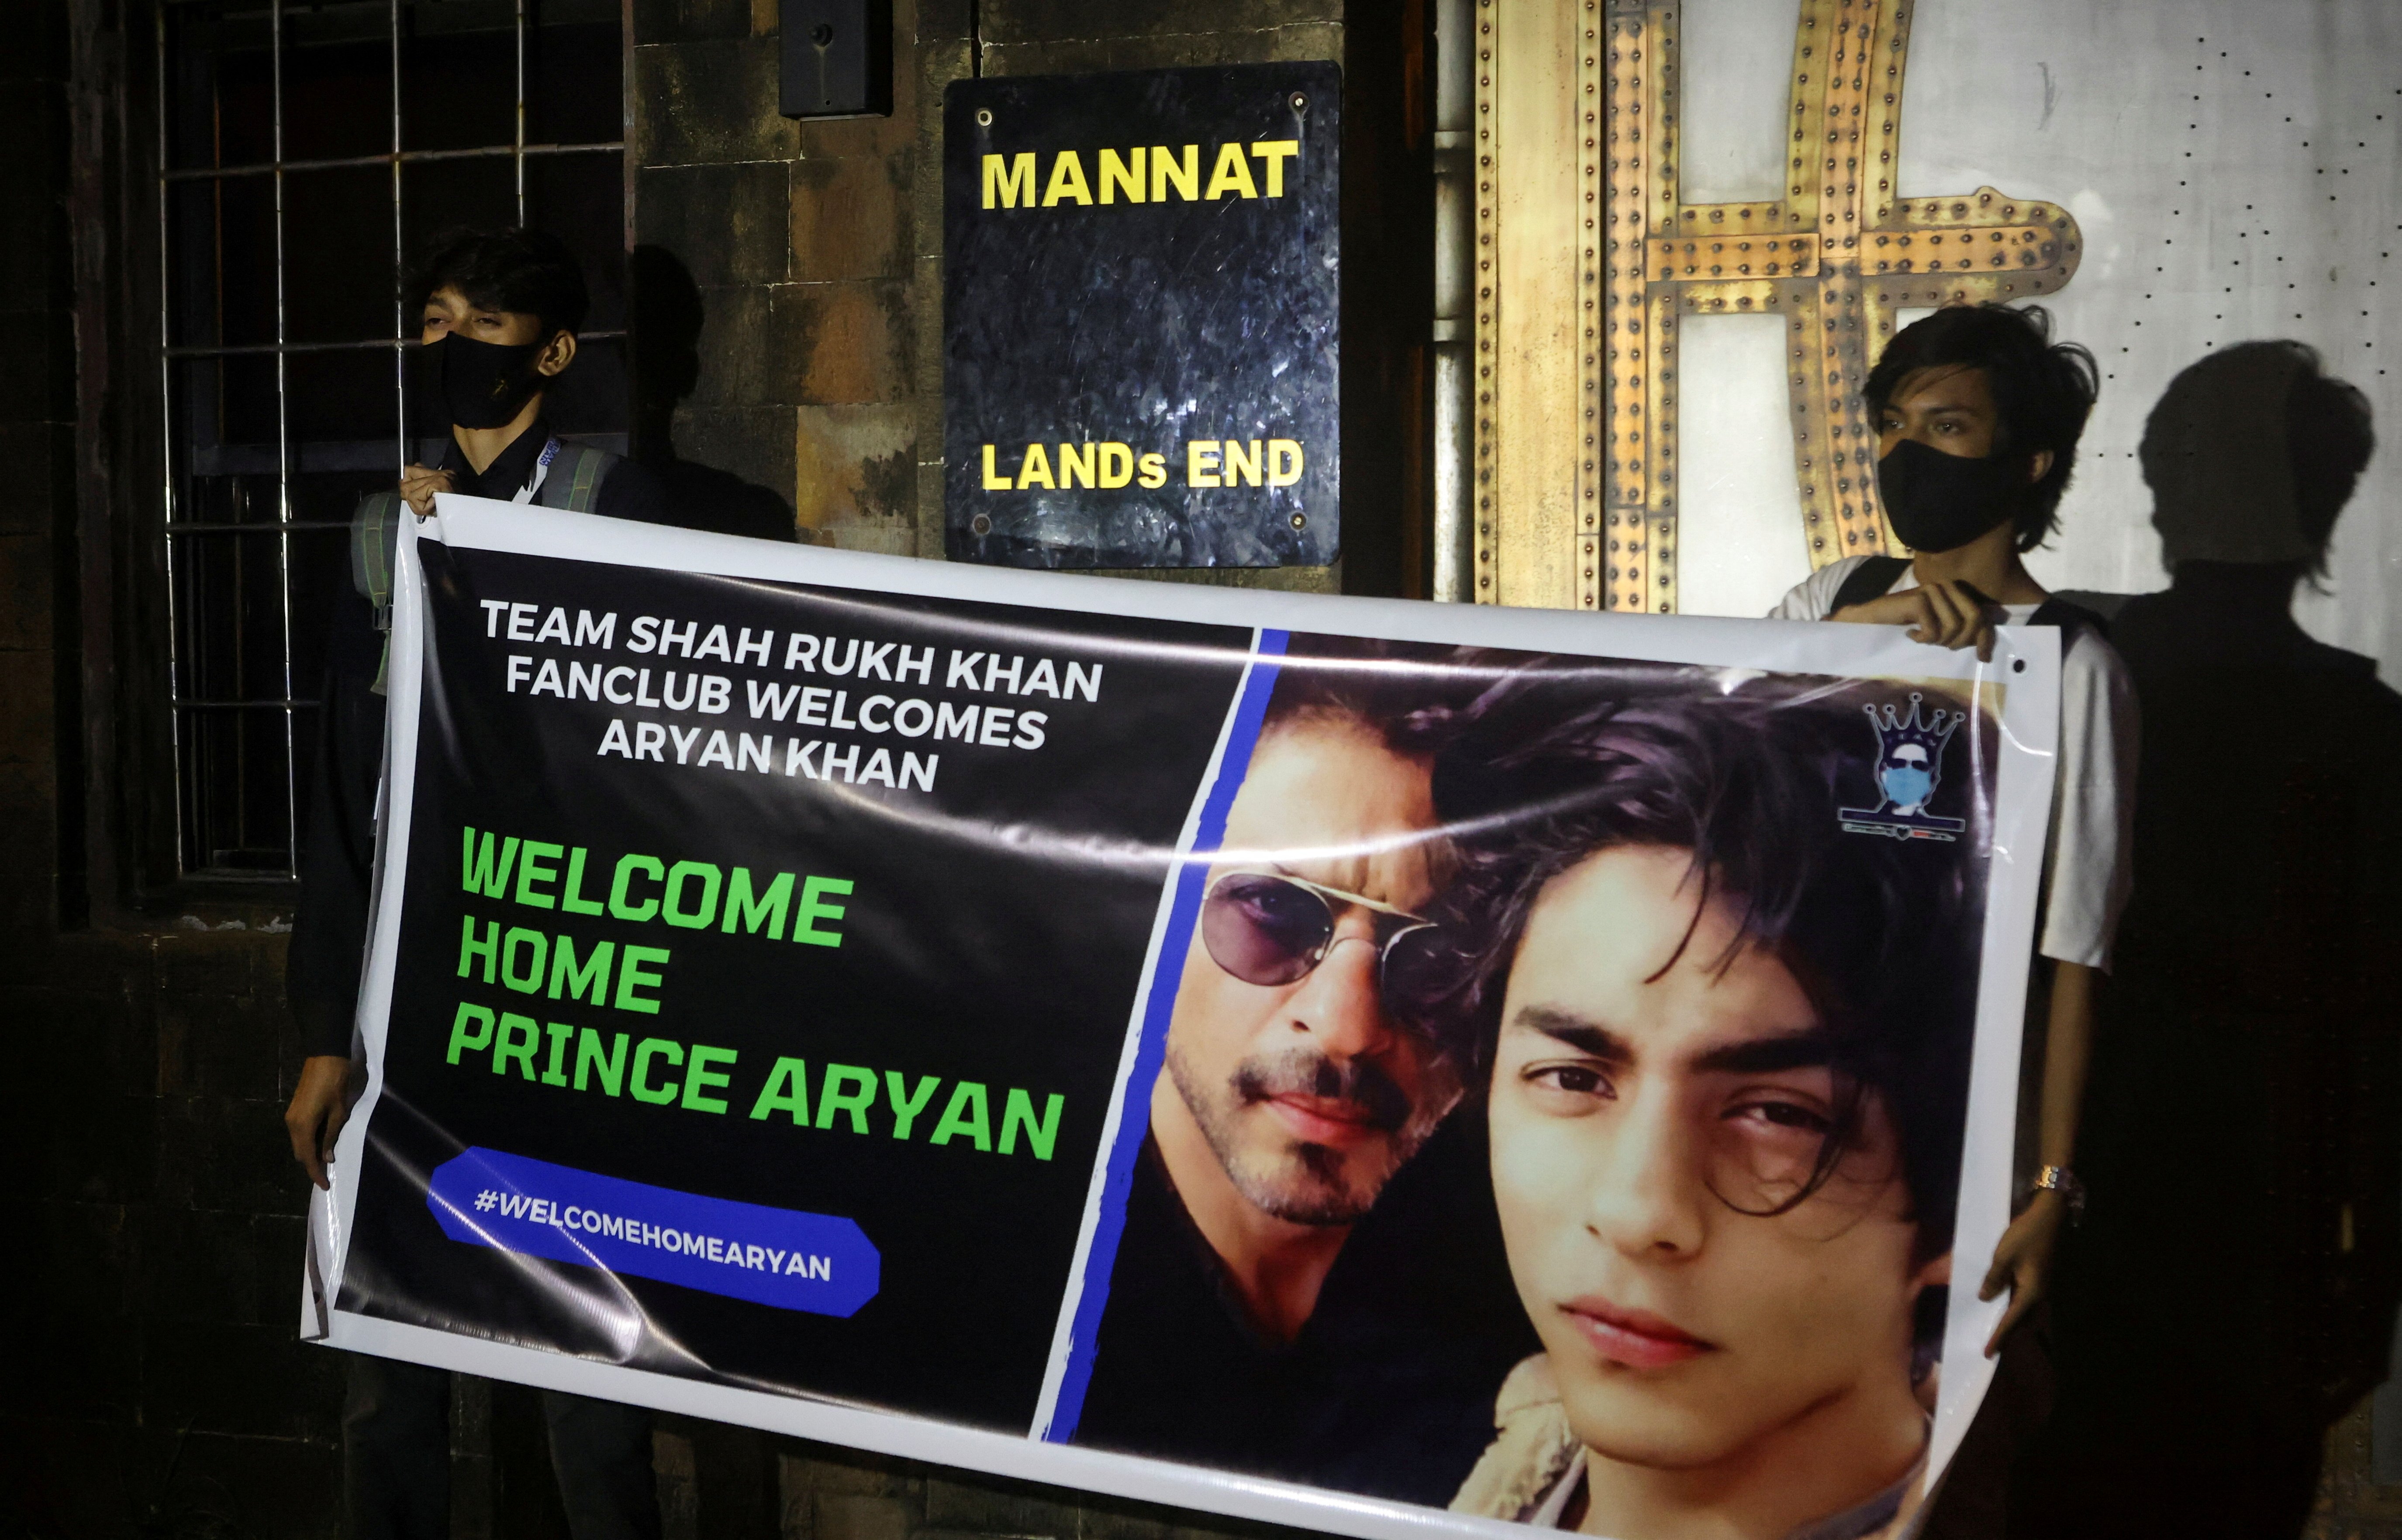 Fans of Bollywood superstar Shah Rukh Khan hold a poster outside his house, Mannat, after his eldest son Aryan Khan was granted bail by the Bombay High Court more than three weeks after he was arrested in a drugs case, in Mumbai, India, Oct. 28, 2021. (REUTERS File Photo)